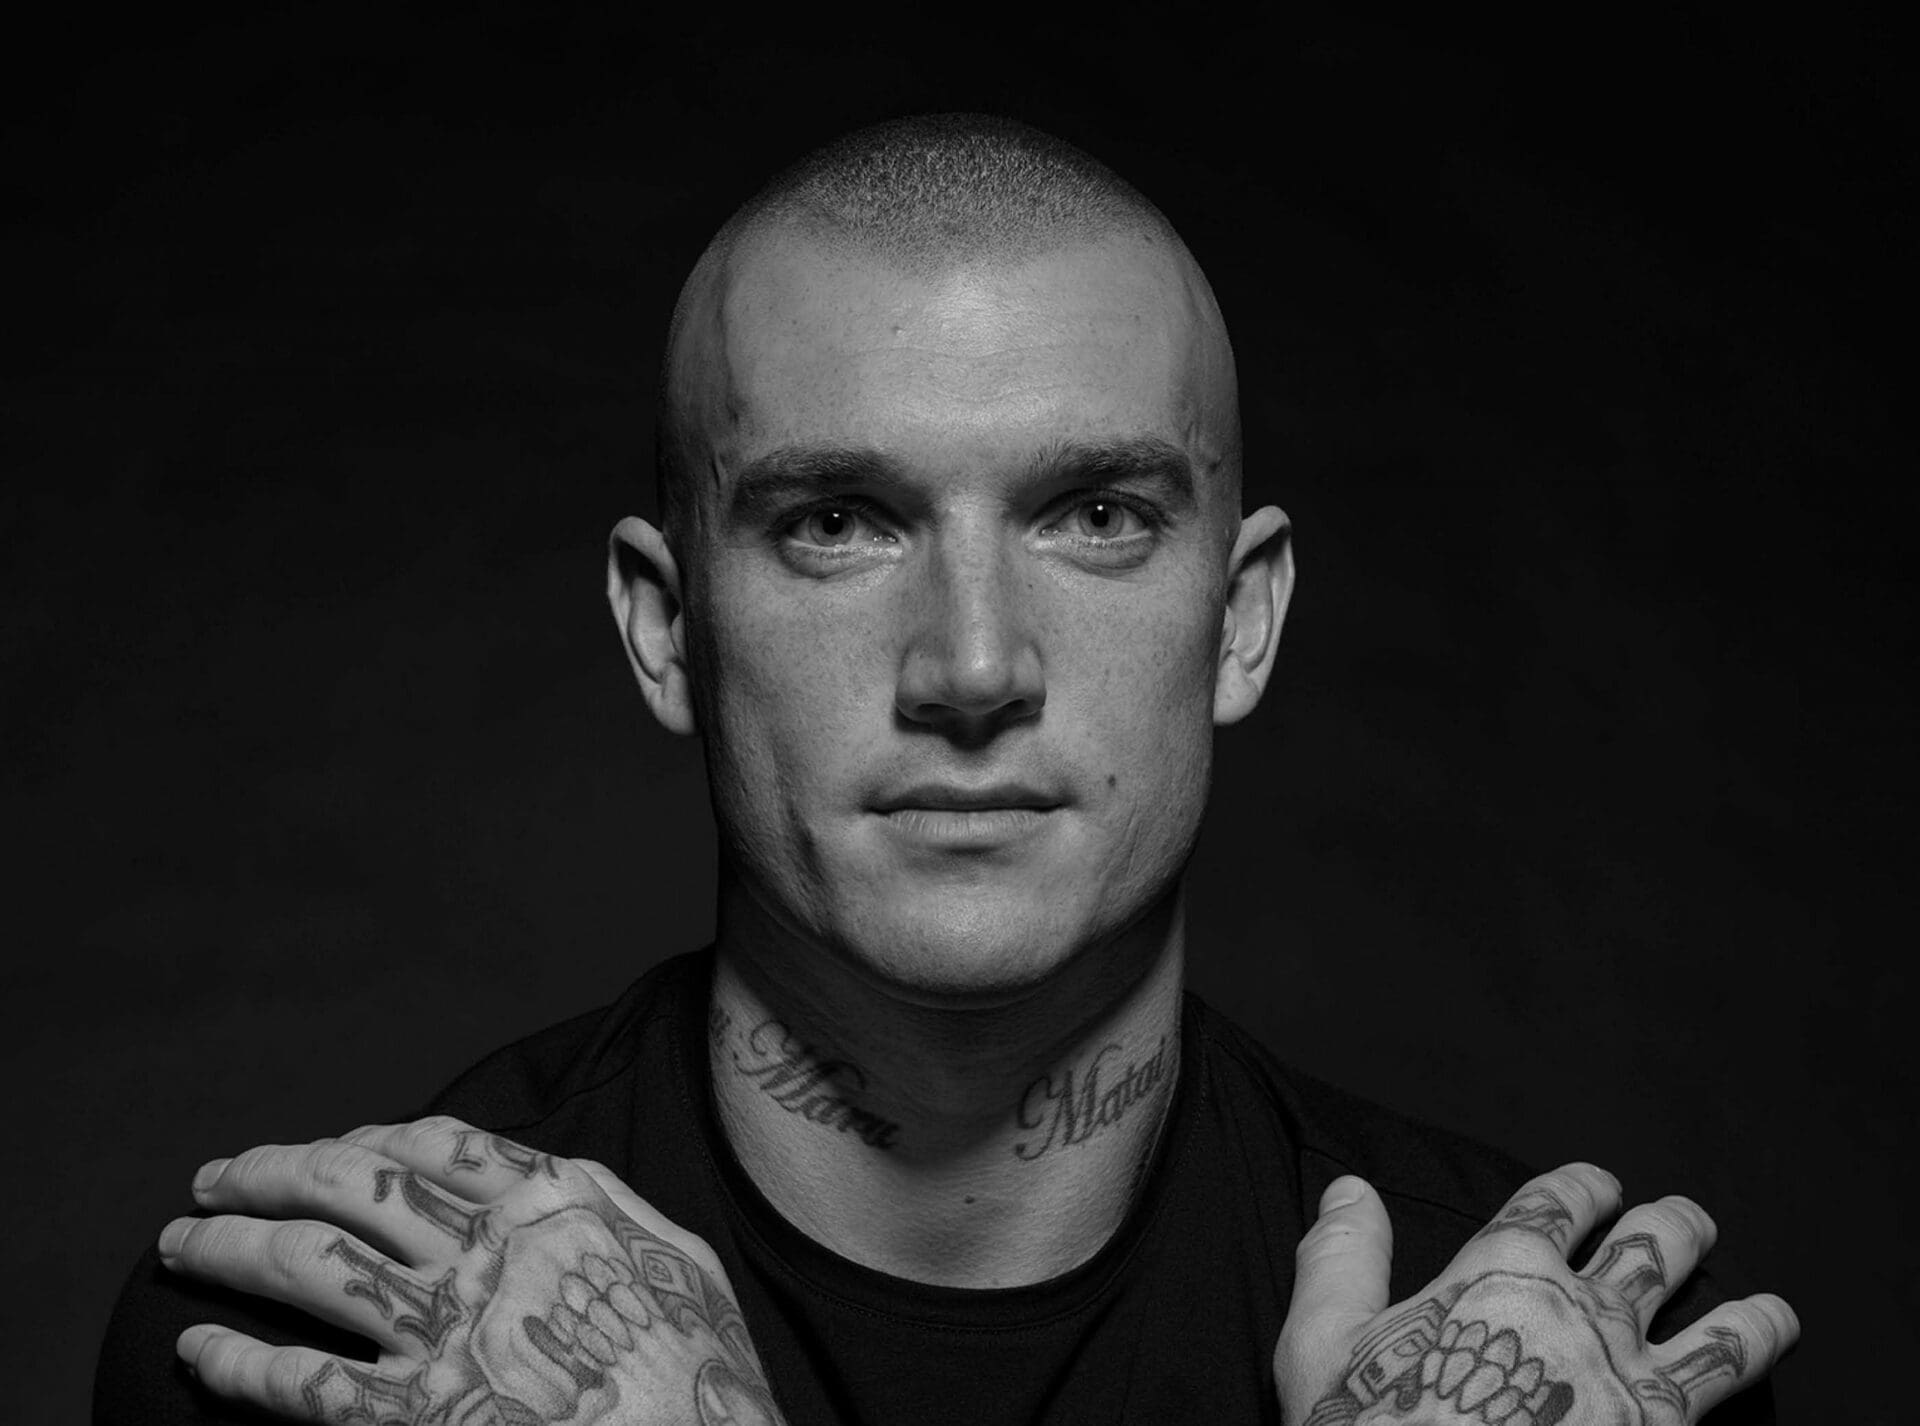 AFL superstar Dustin Martin partners with Kennedy for eye-catching, heavily tattooed campaign